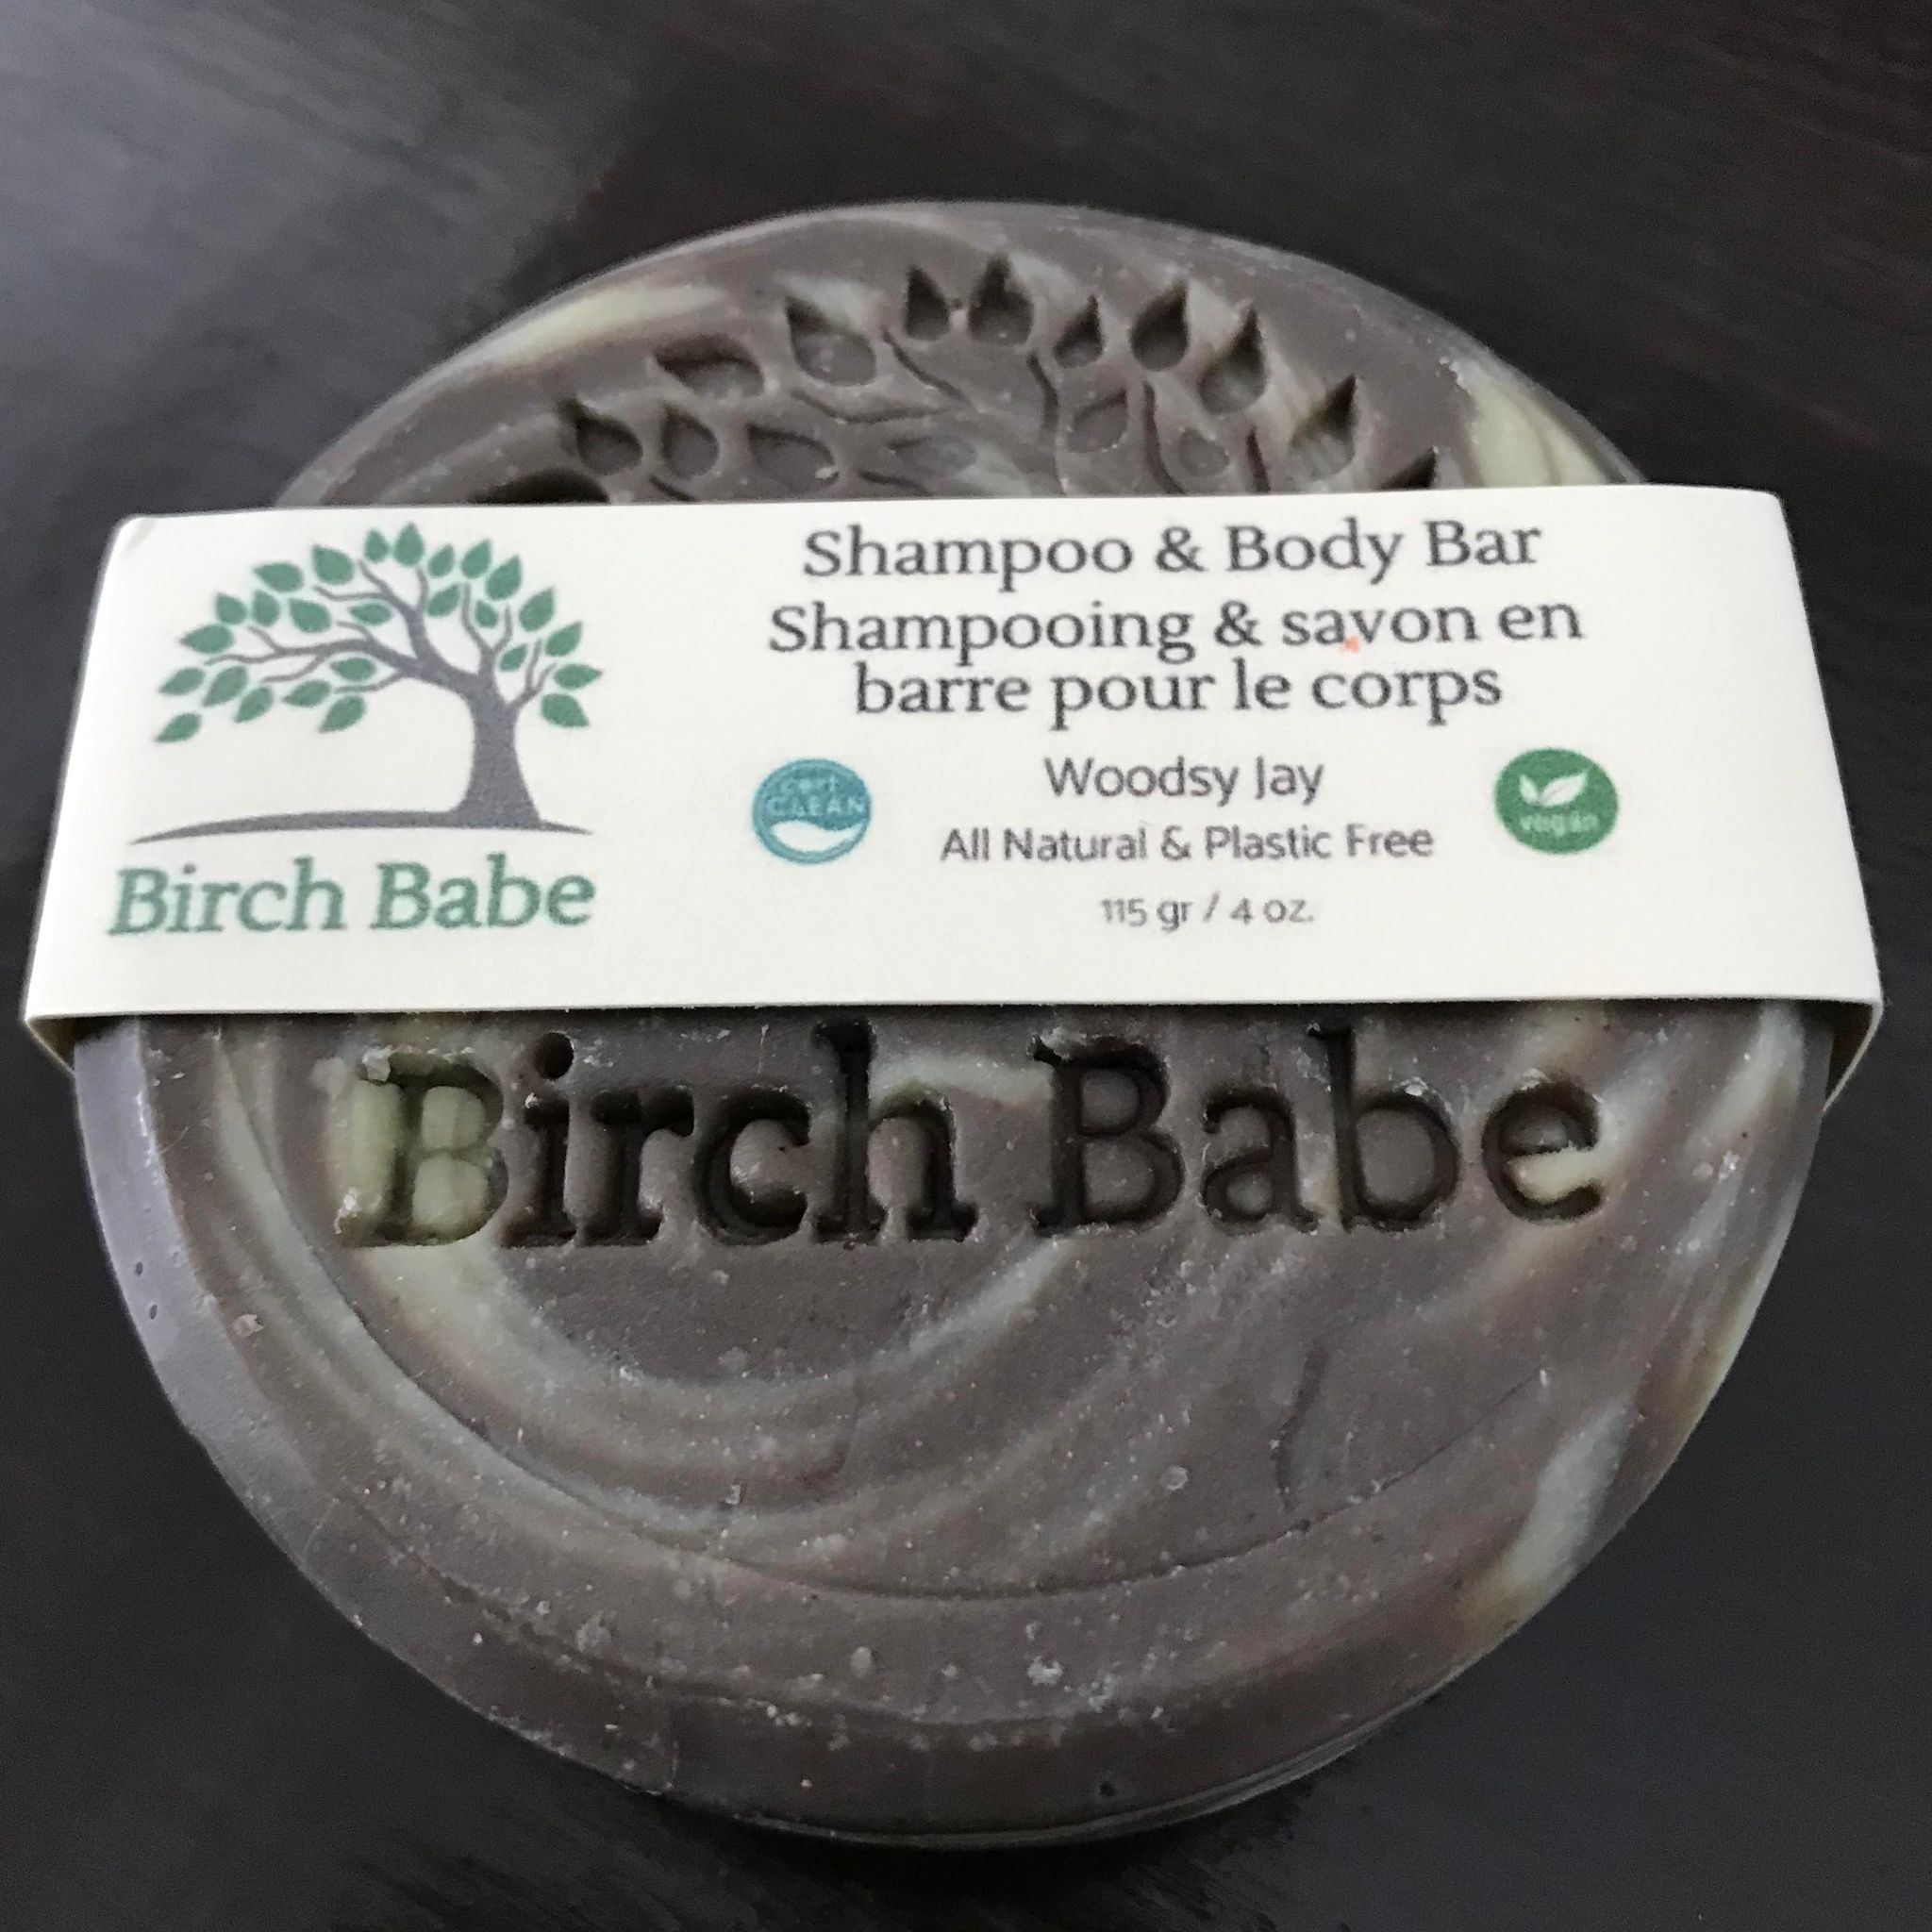 Woodsy Jay shampoo and body bar made in Canada by Birch Babe is infused with hints of tobacco leaves for a subtle smokey scent that will leave you feeling like you're about to chop wood for a cabin deep in the forest.